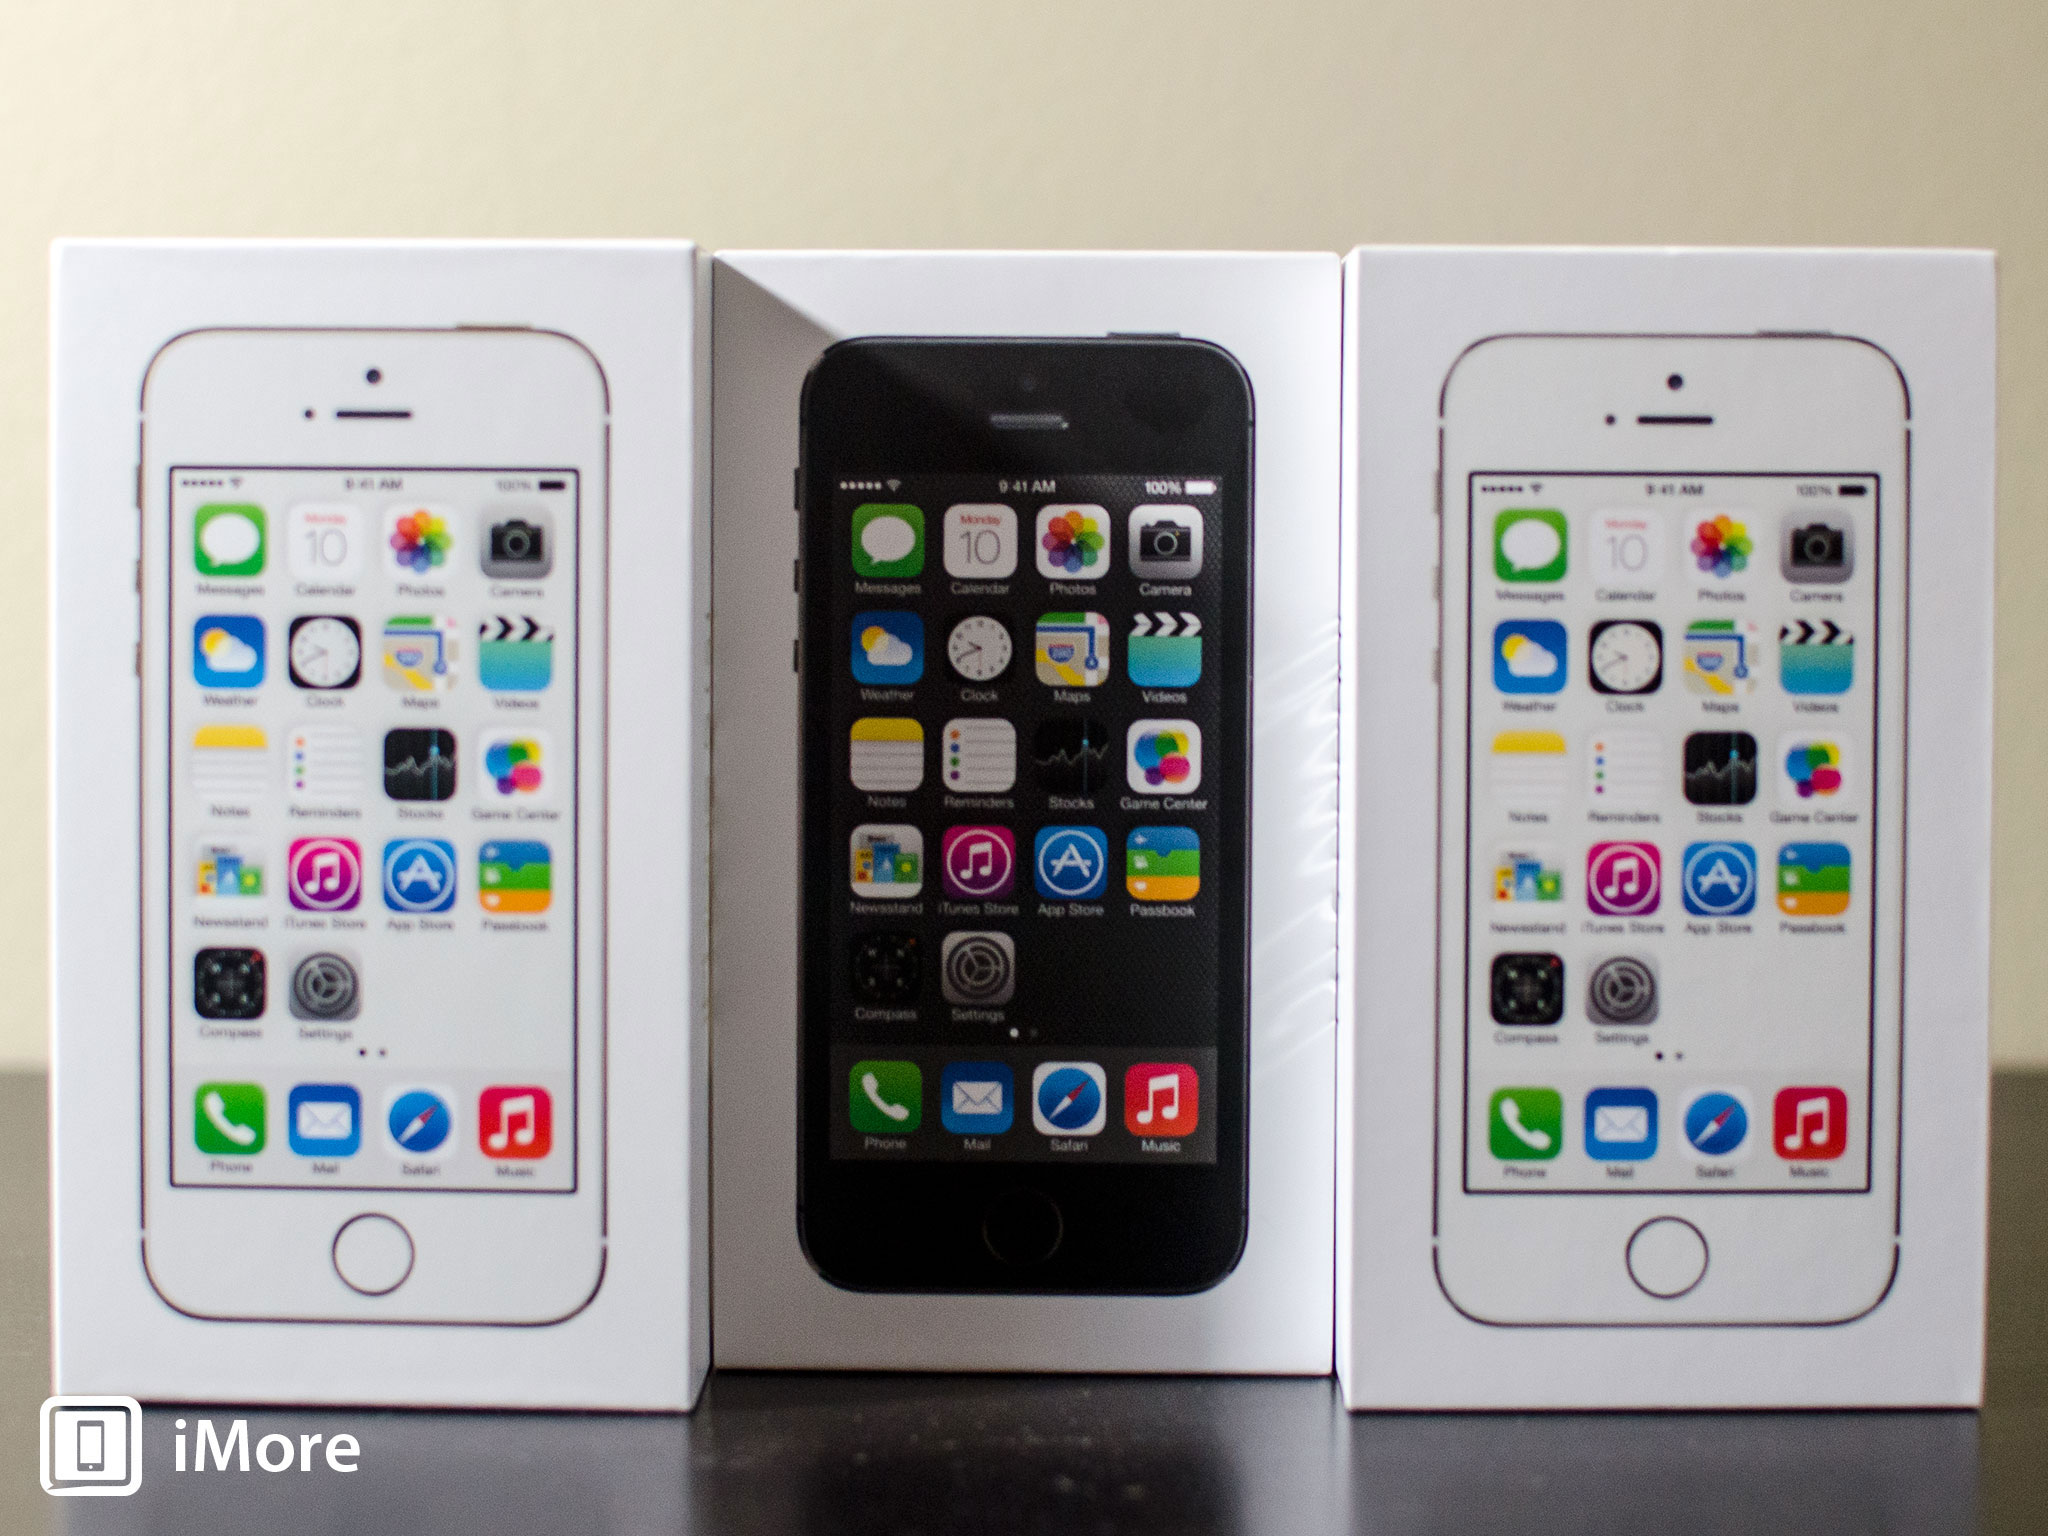 iPhone 5s: Pricing and availability